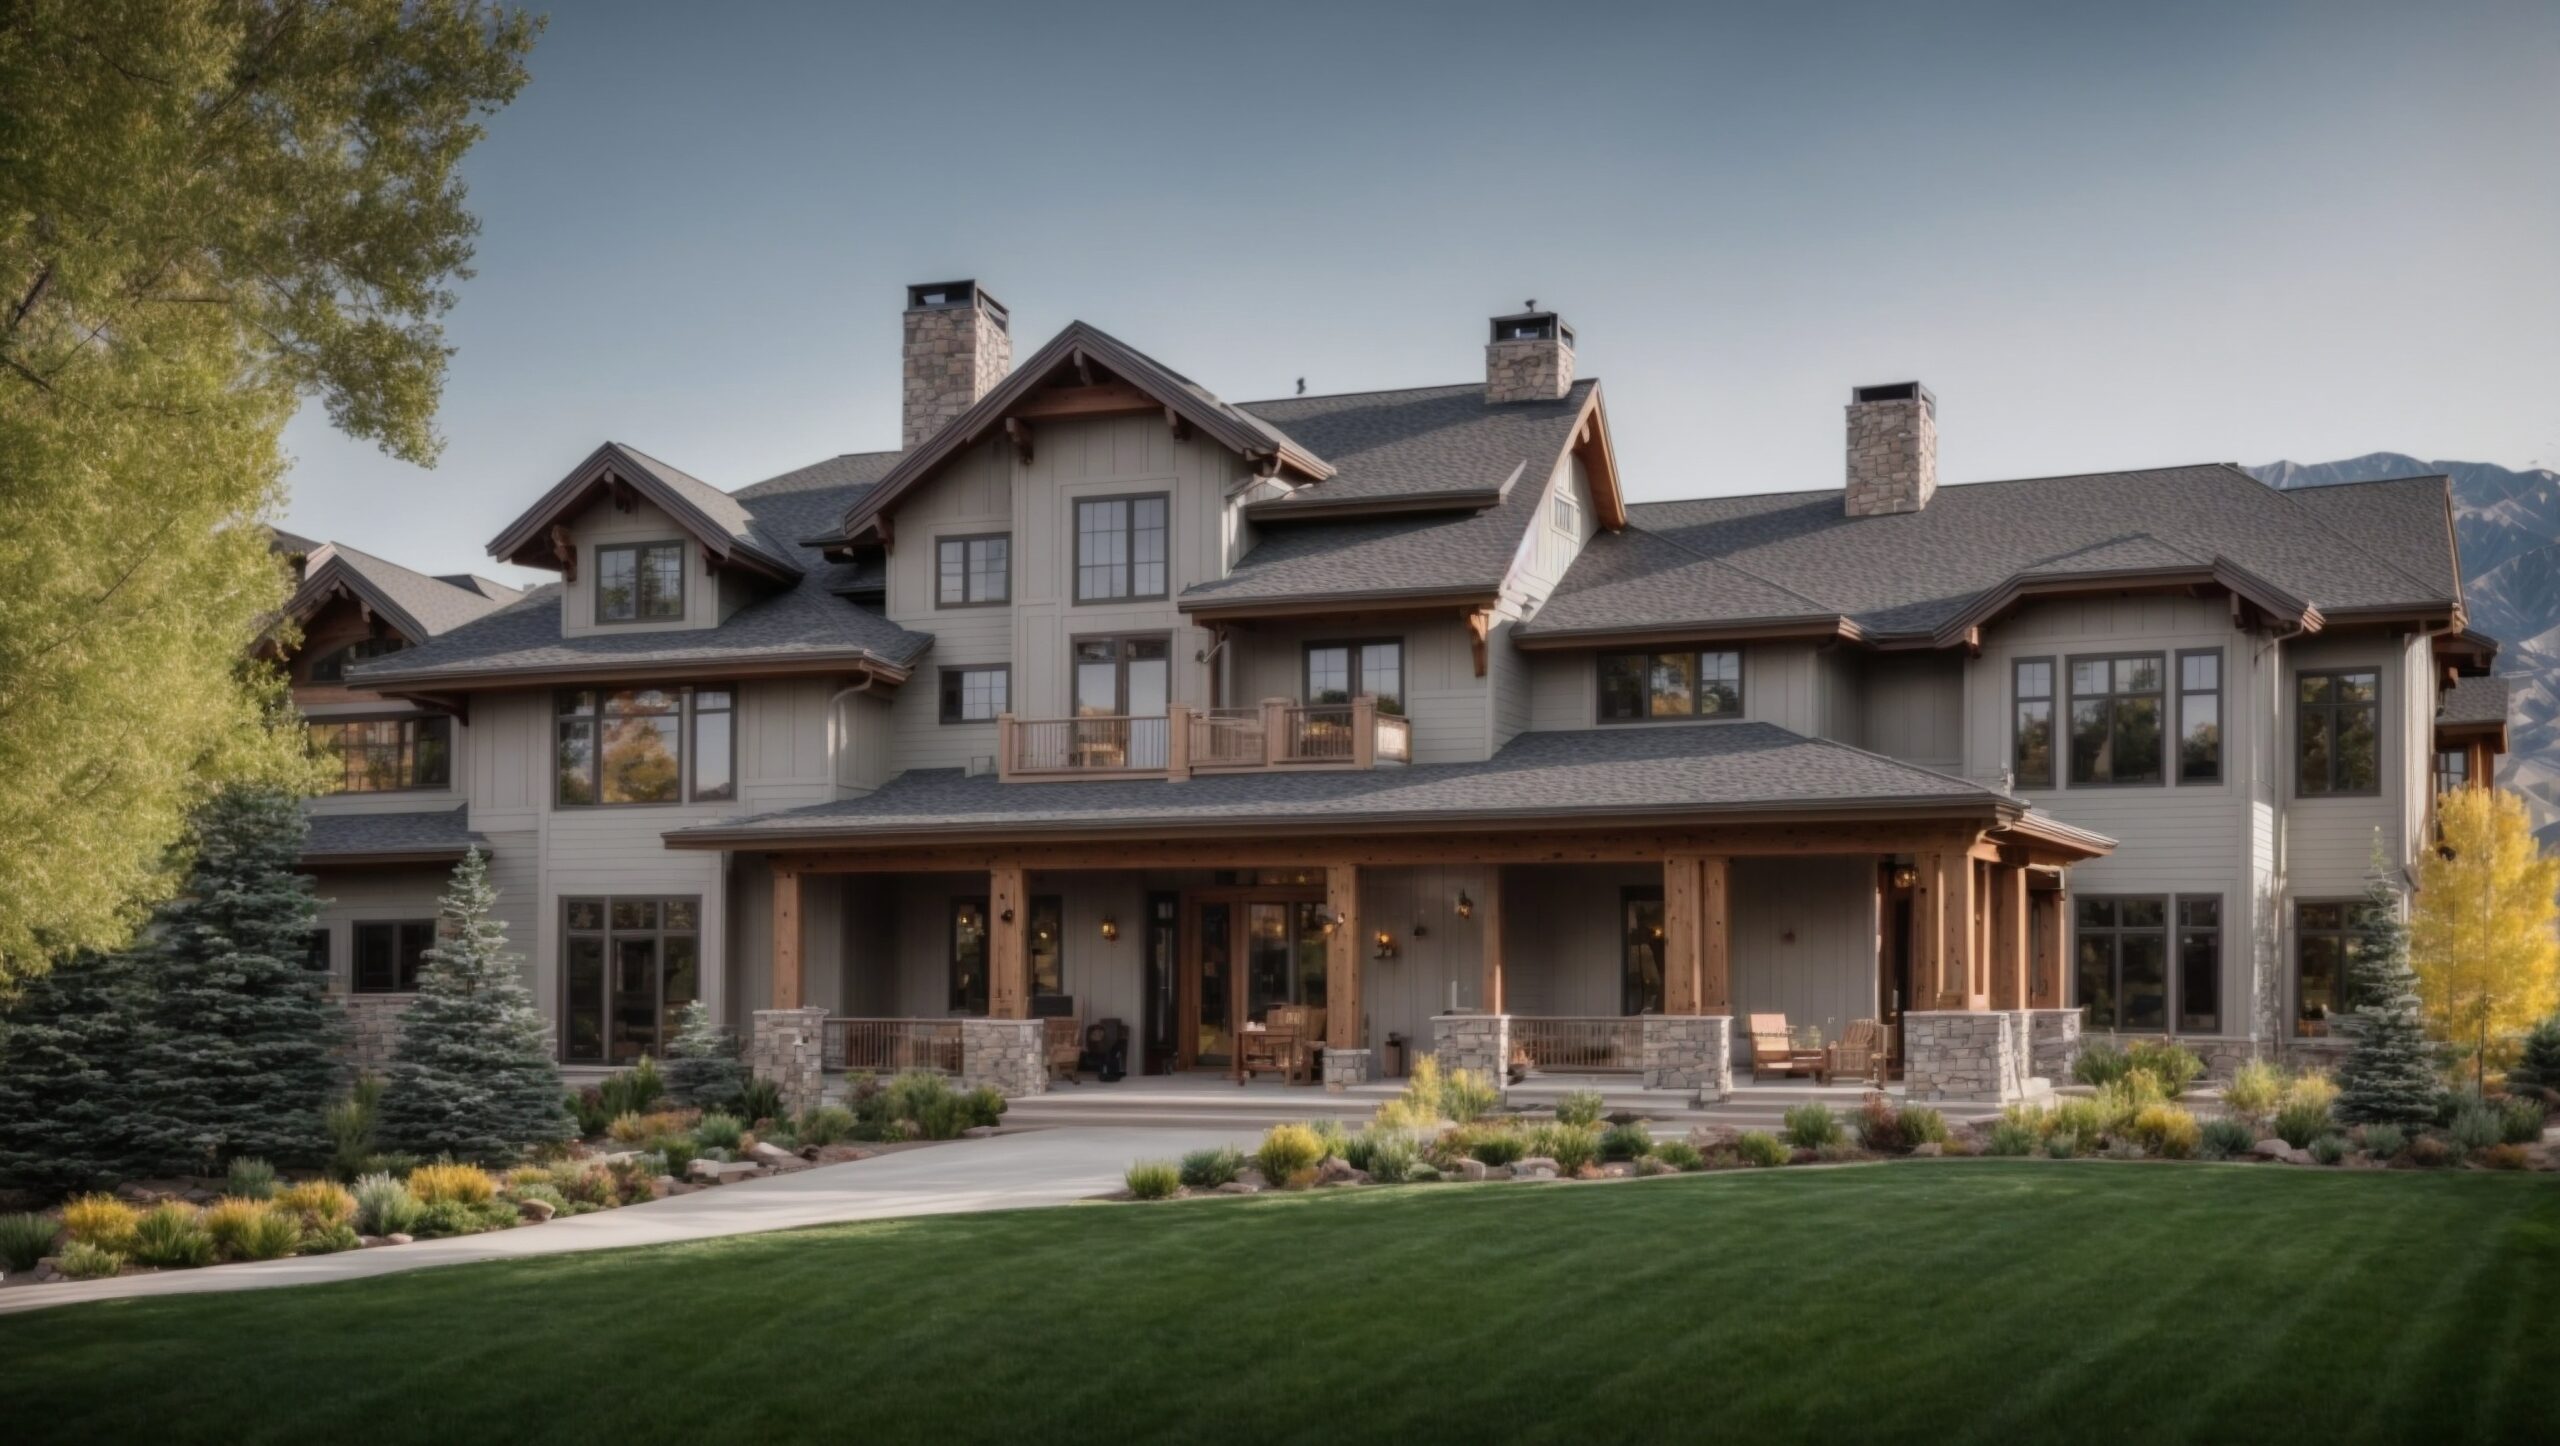 Castle Rock's approach to metal siding is both accomplished and innovative.